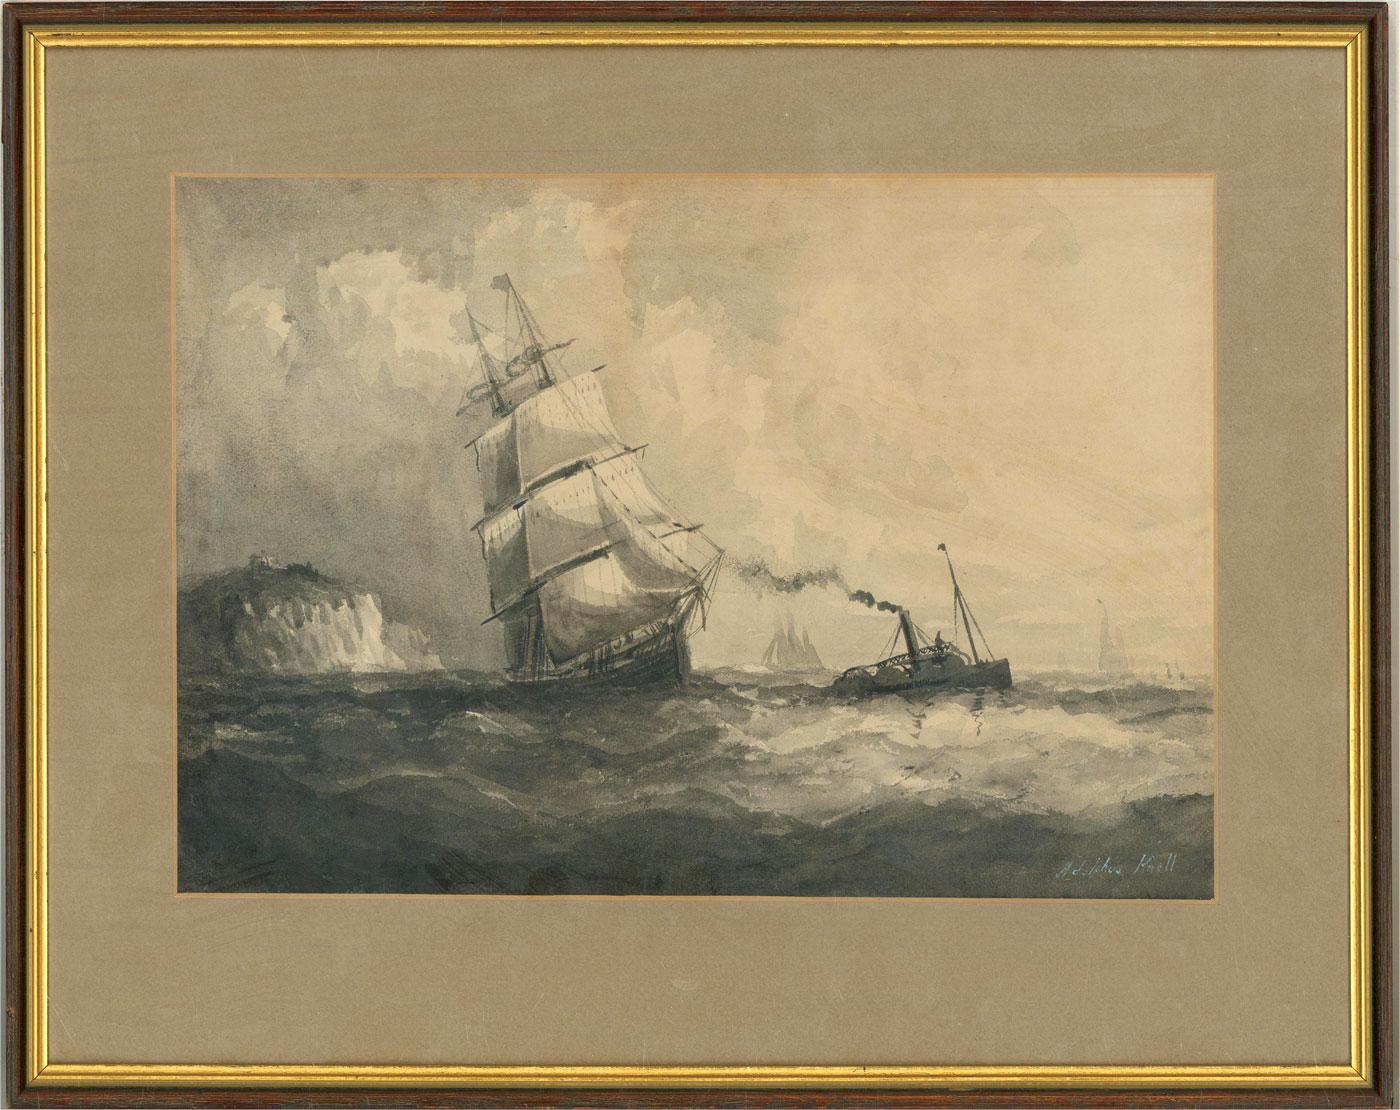 A watercolour painting en grisaille depicting a brig and tugboat on choppy waters off the coastline. Presented in a grey mount and a wooden frame with a gilt-effect inner edge. Signed to the lower-right edge. On watercolour paper.
